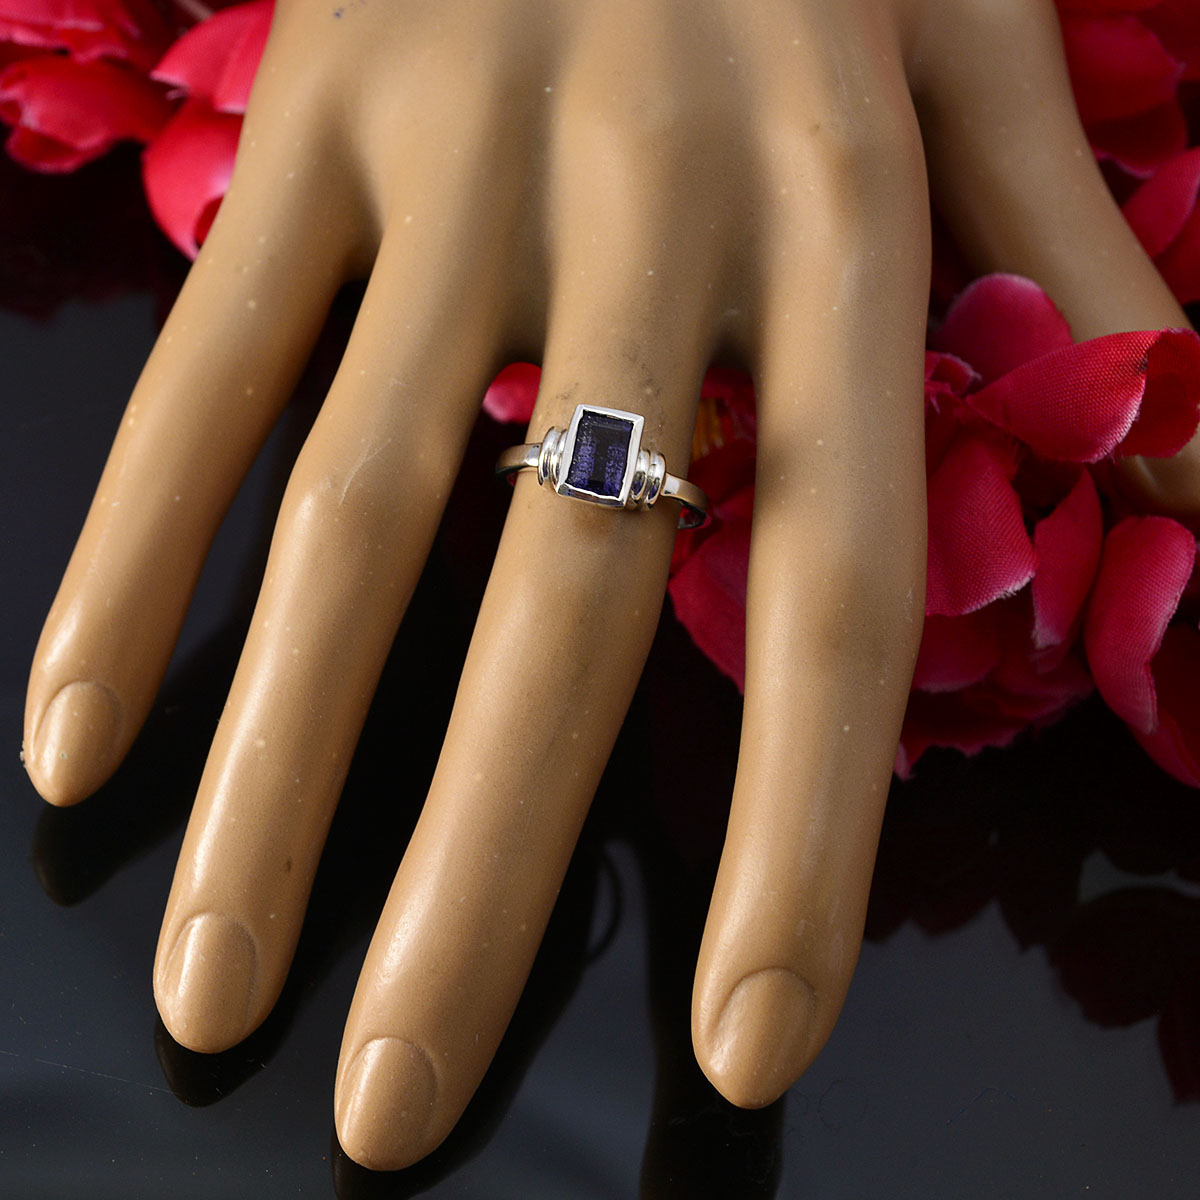 Bewitching Gemstones Iolite 925 Sterling Silver Ring Magnolia Jewelry